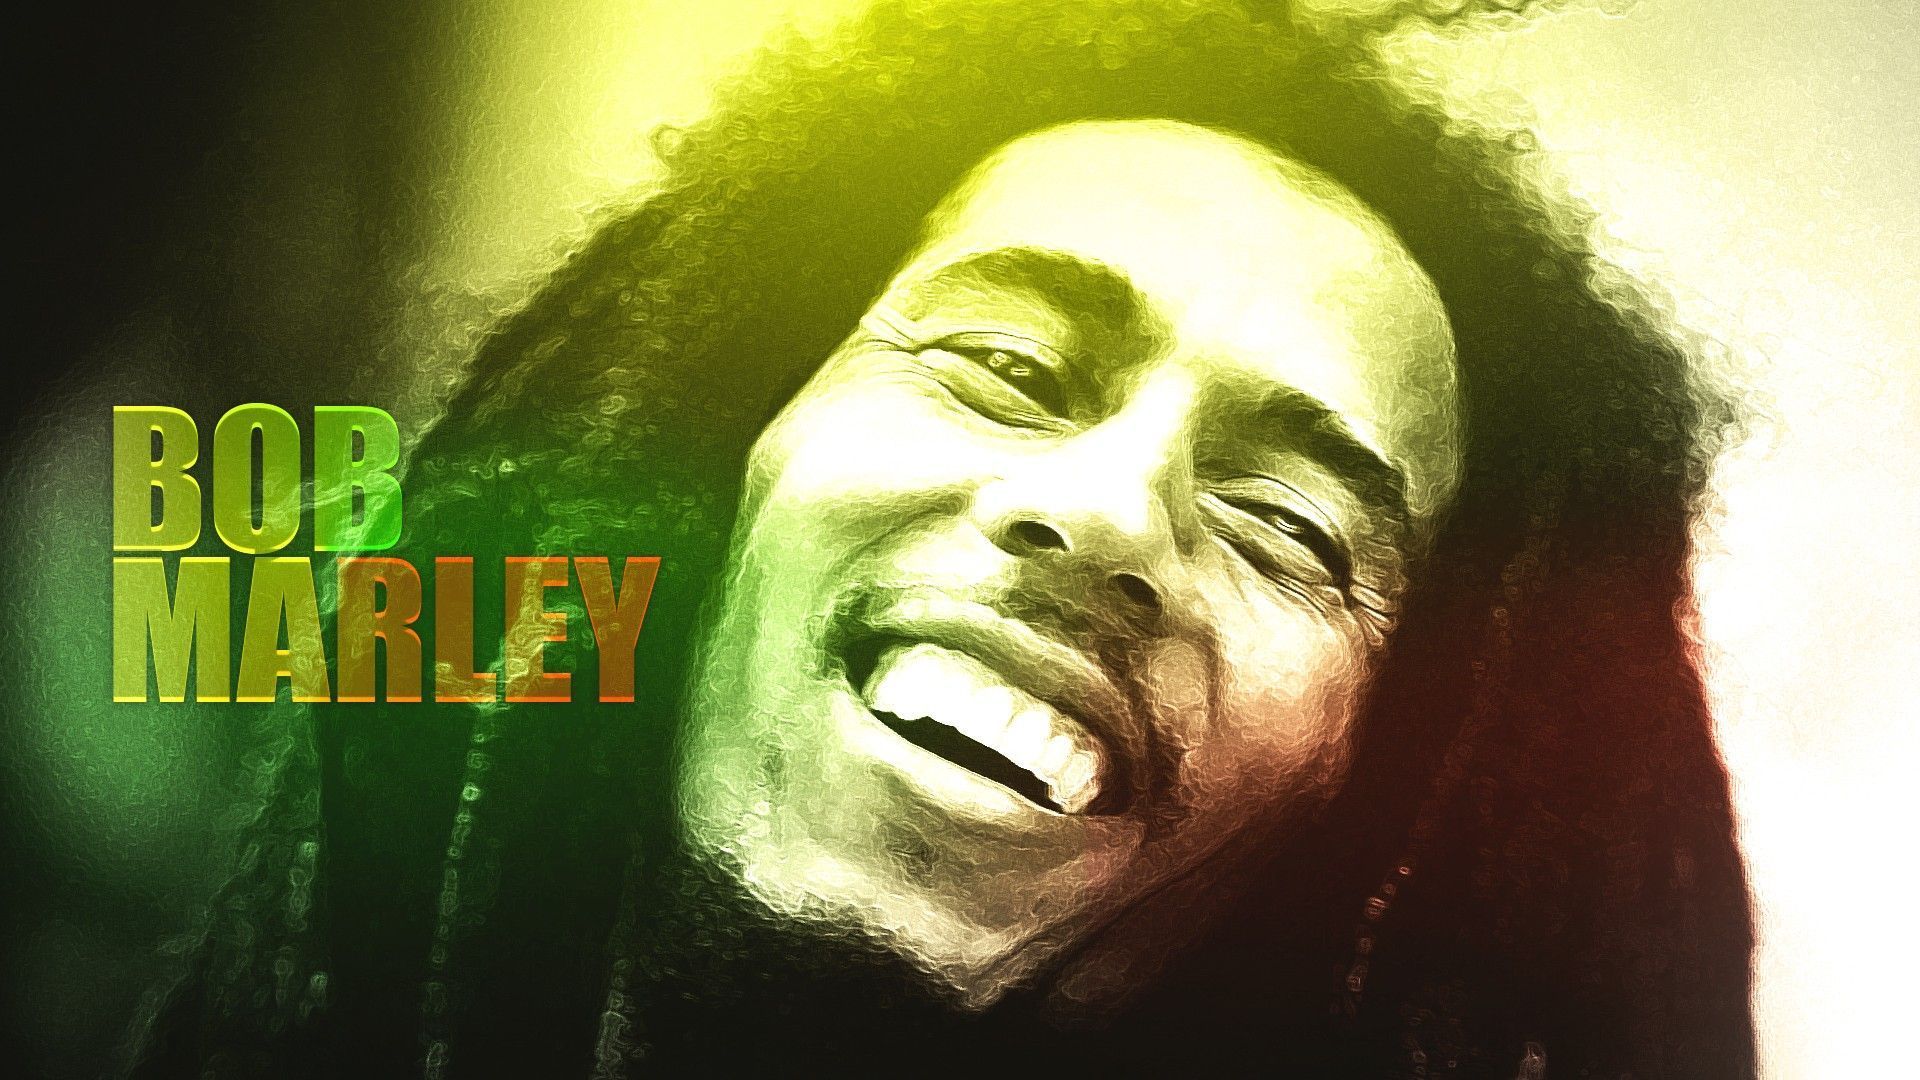 Top Bob Marley Hd Wallpapers Images for Pinterest